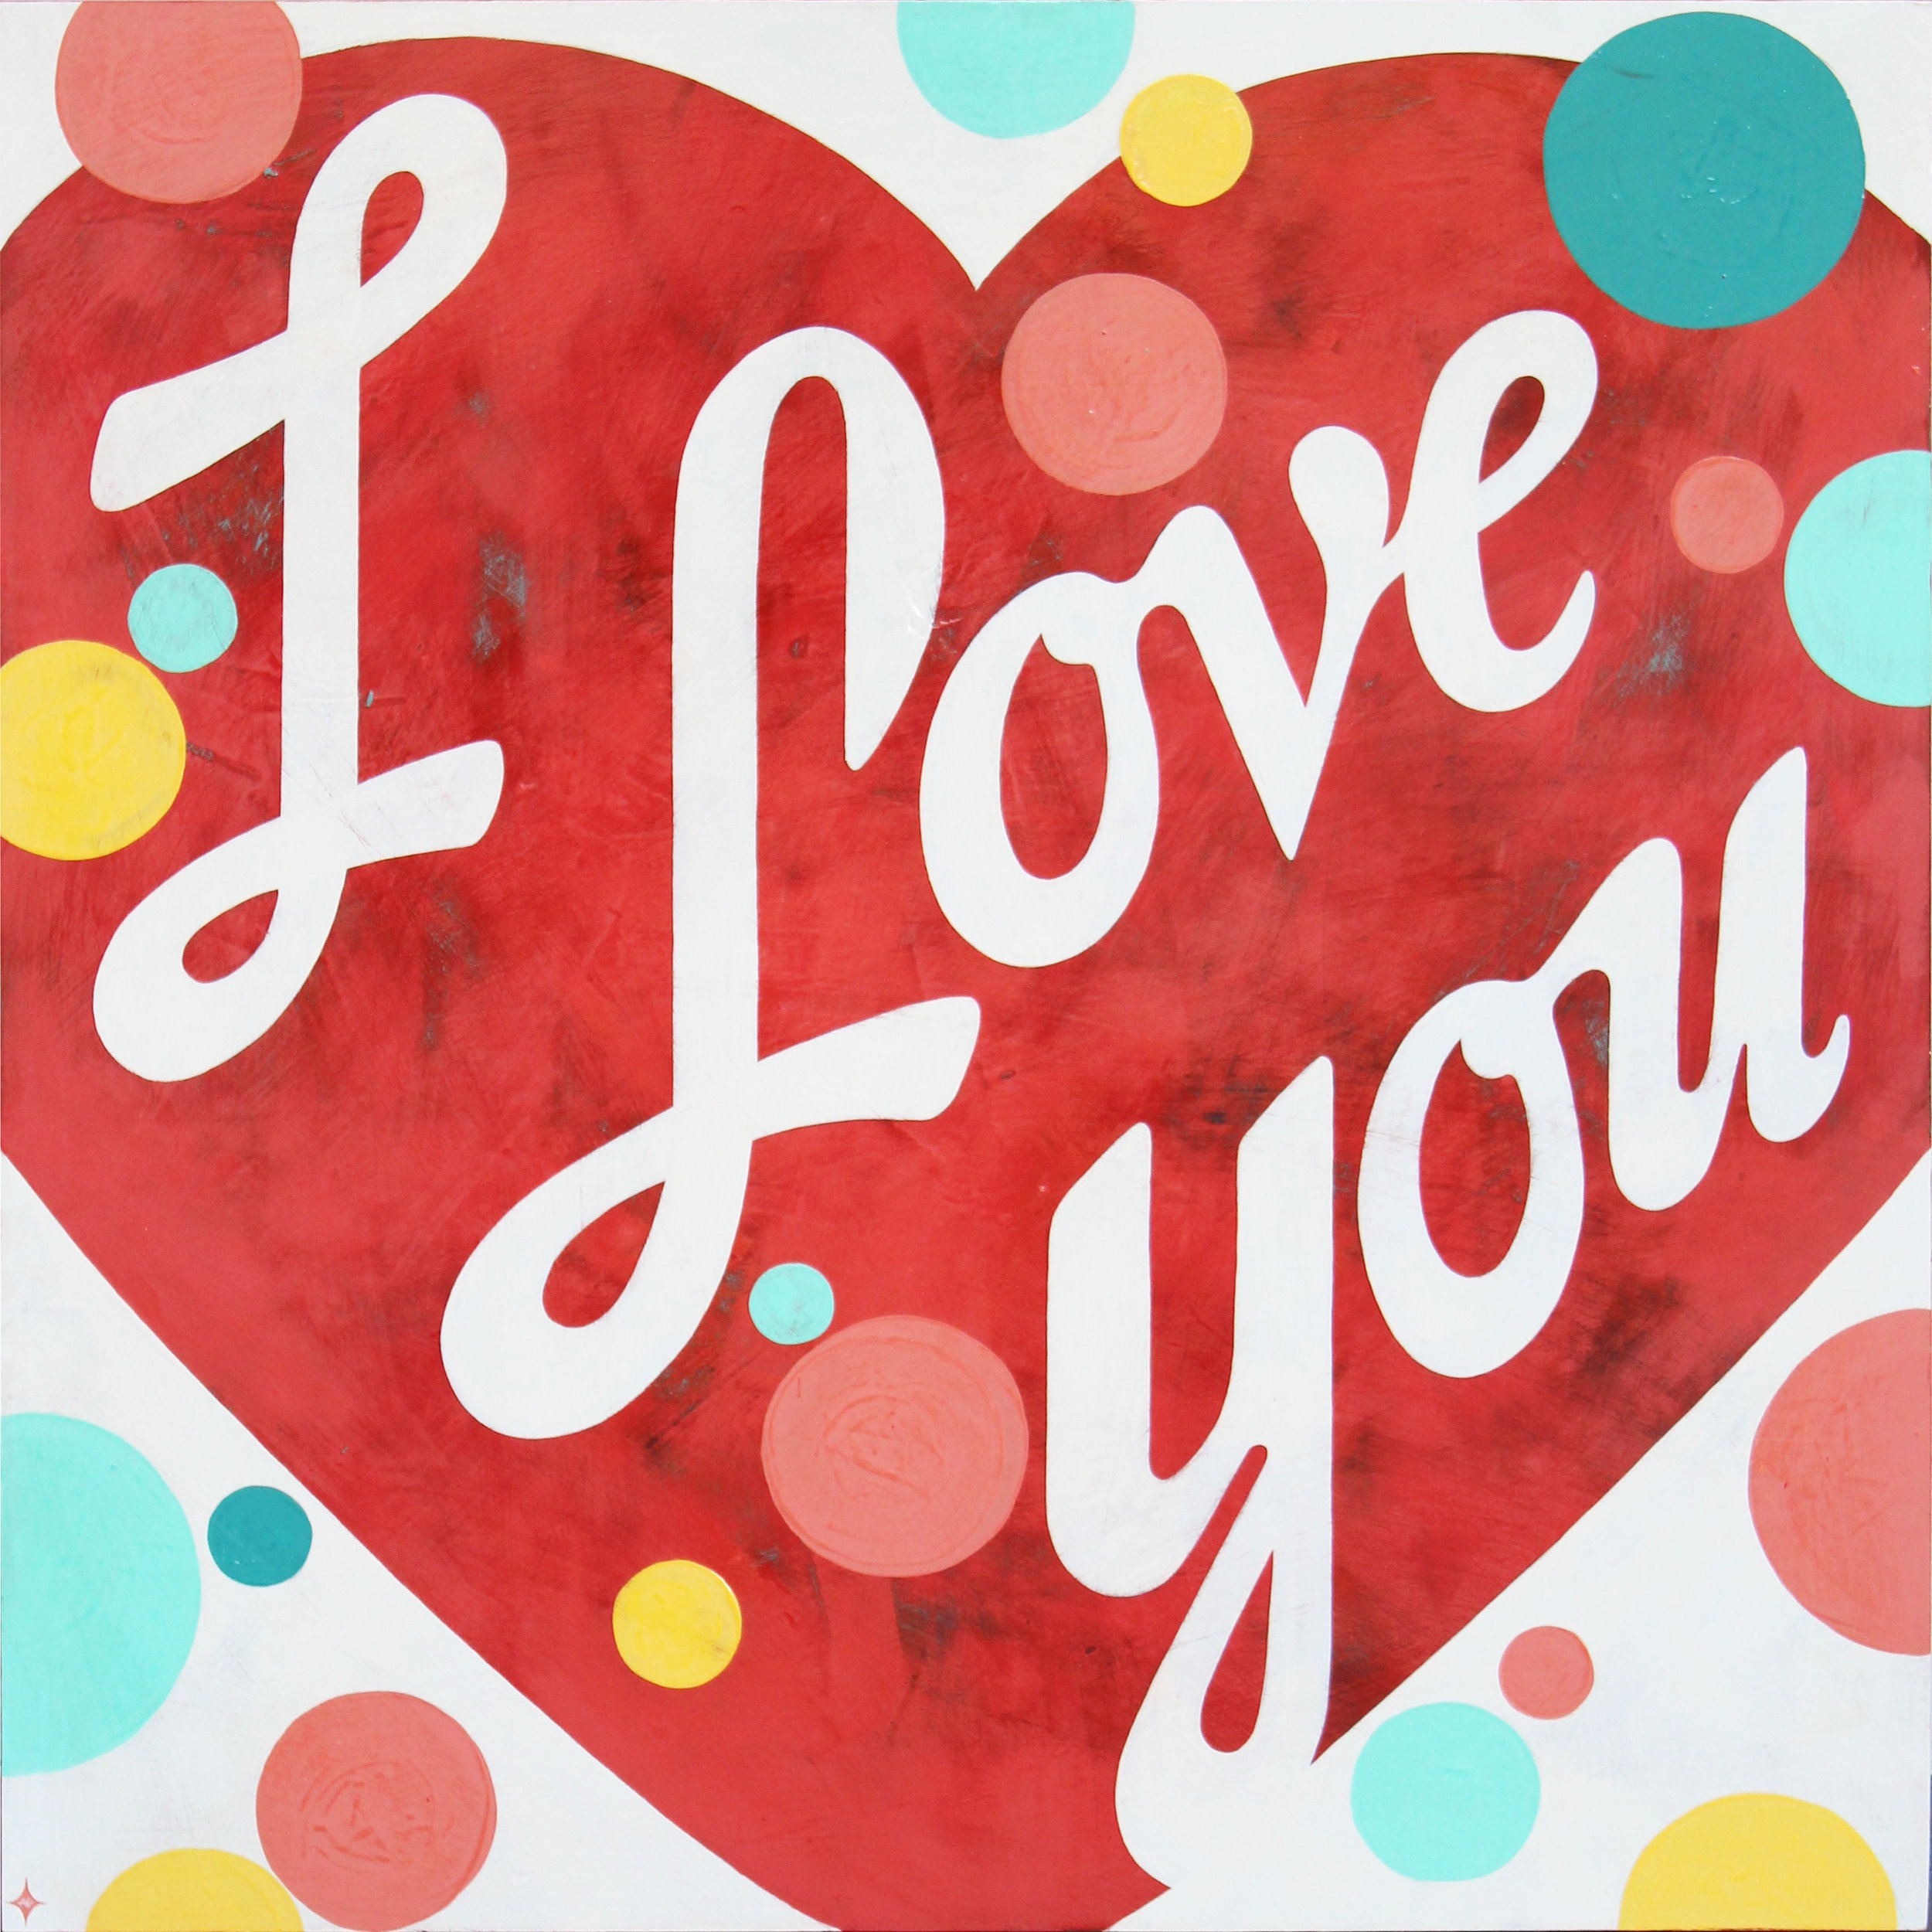 "I Love You" (With Polka Dots)